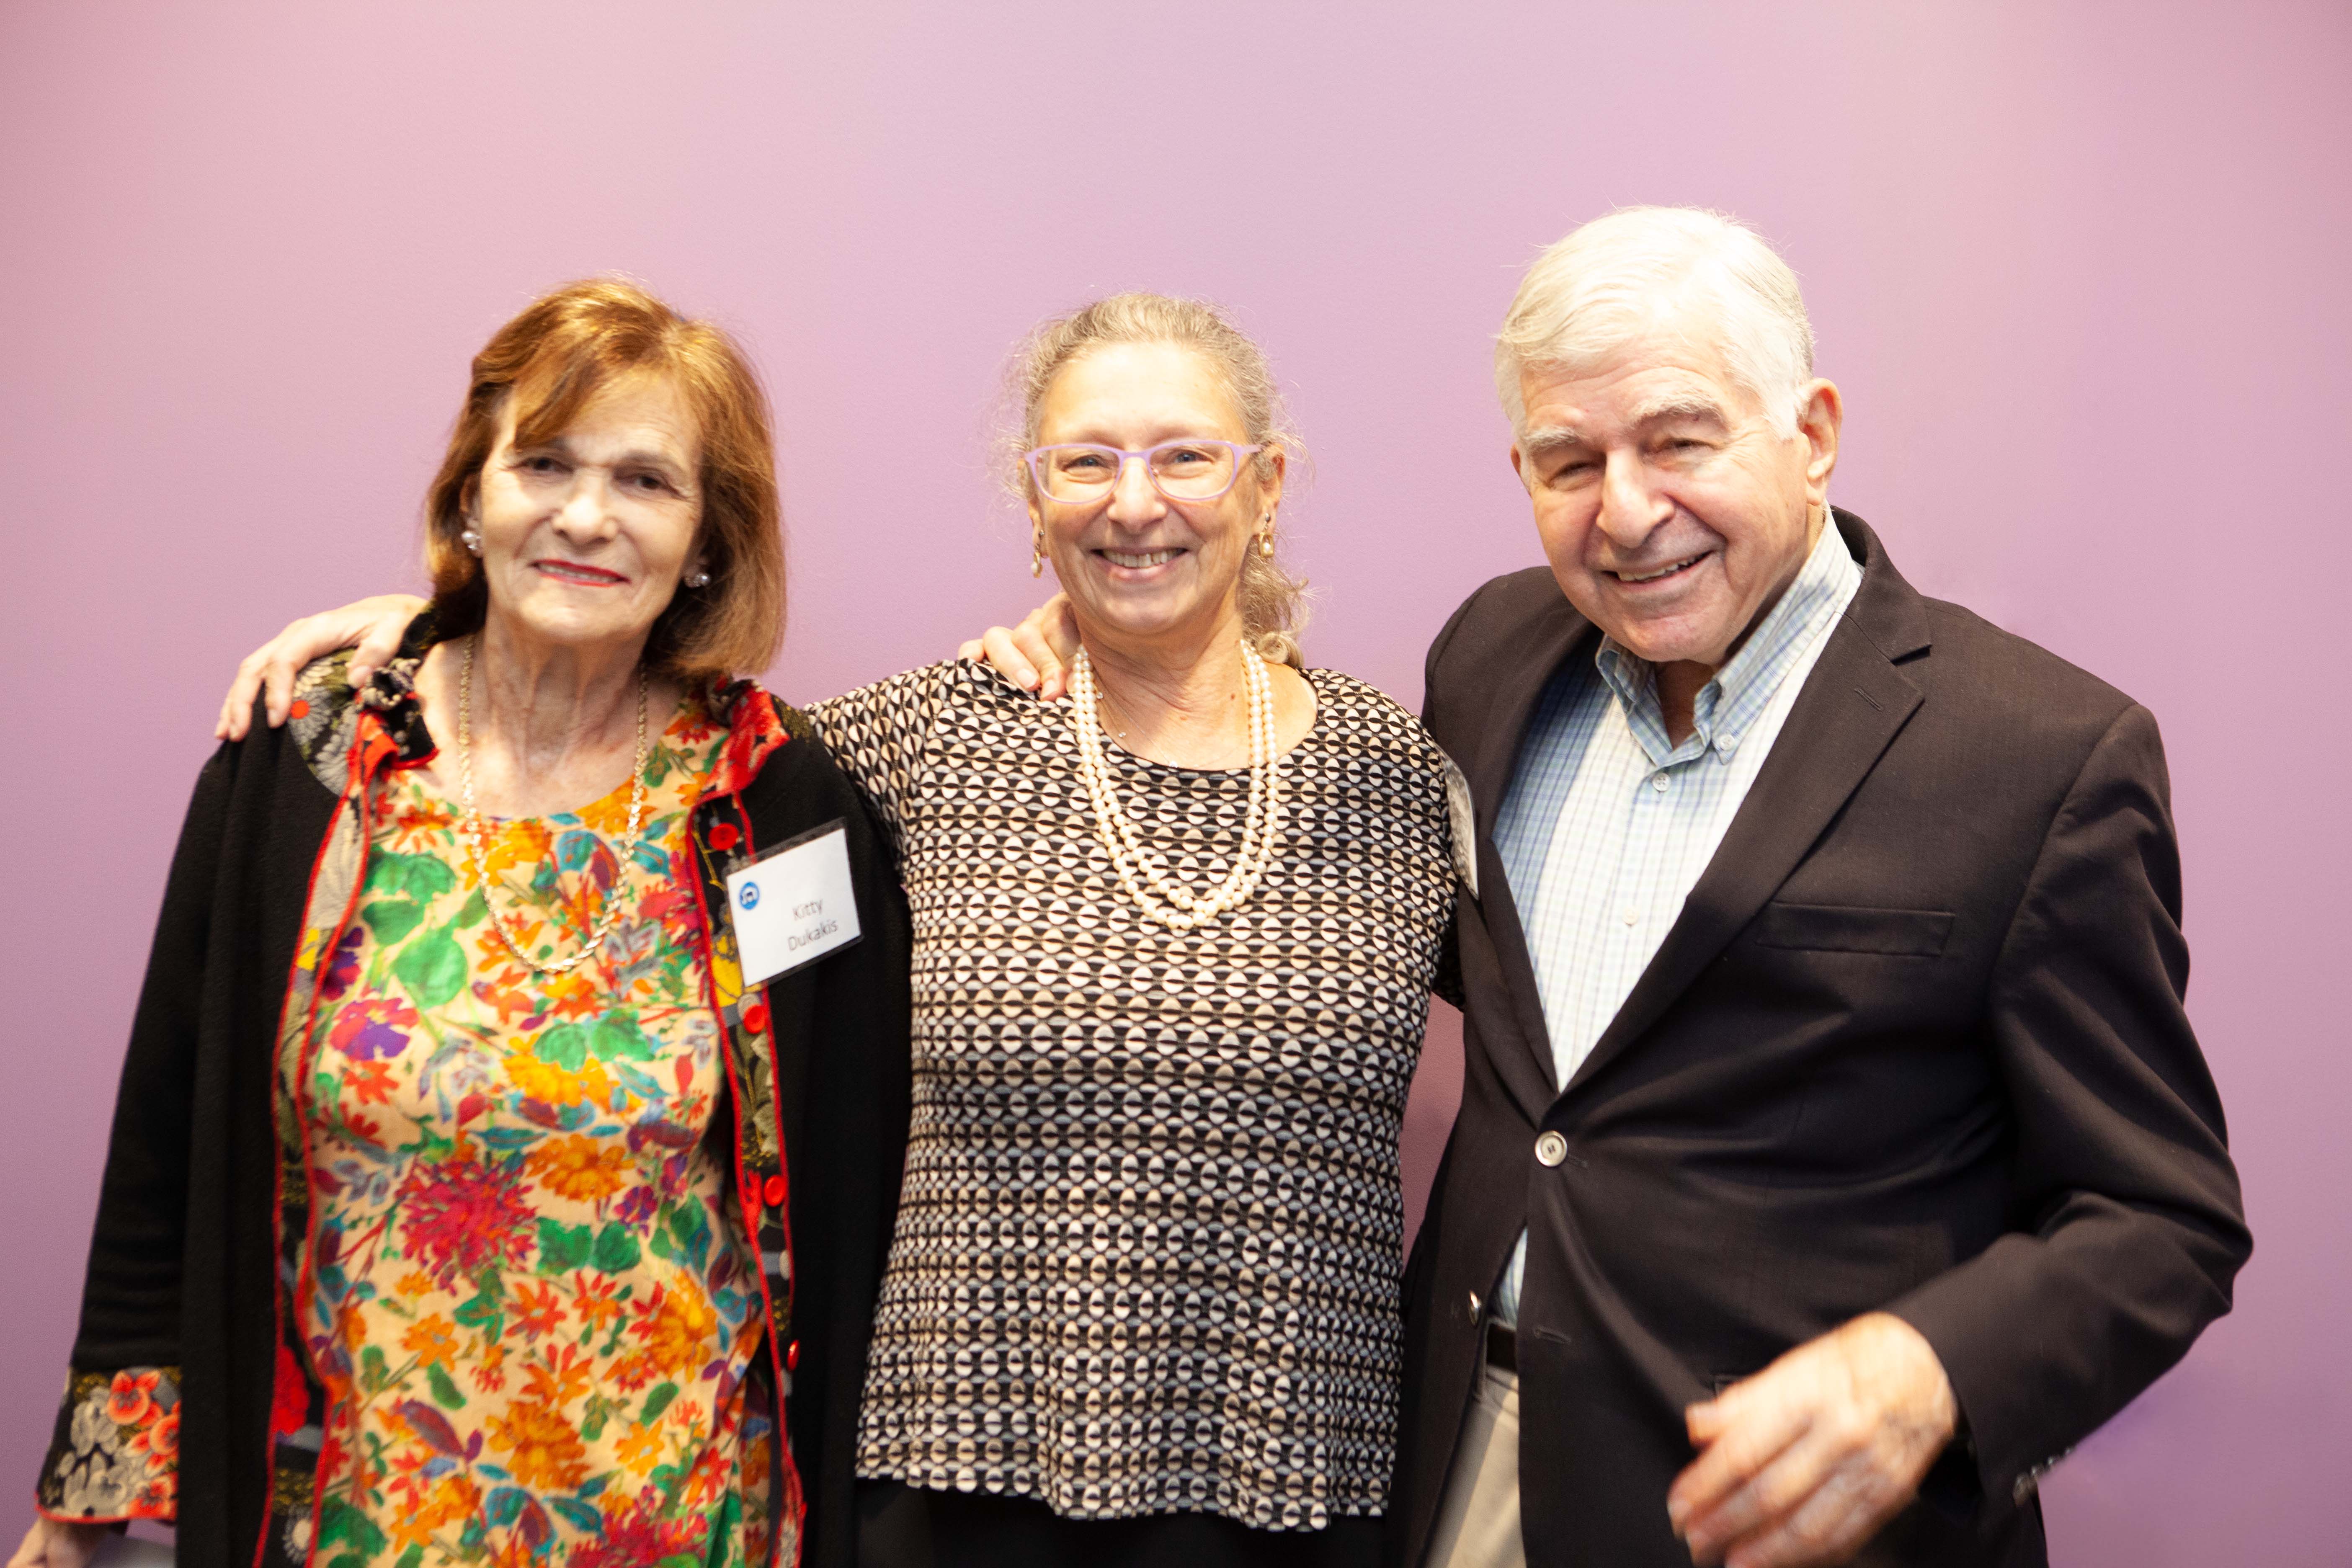 Pictured left to right: Kitty Dukakis, Amy Schectman, and Michael Dukakis